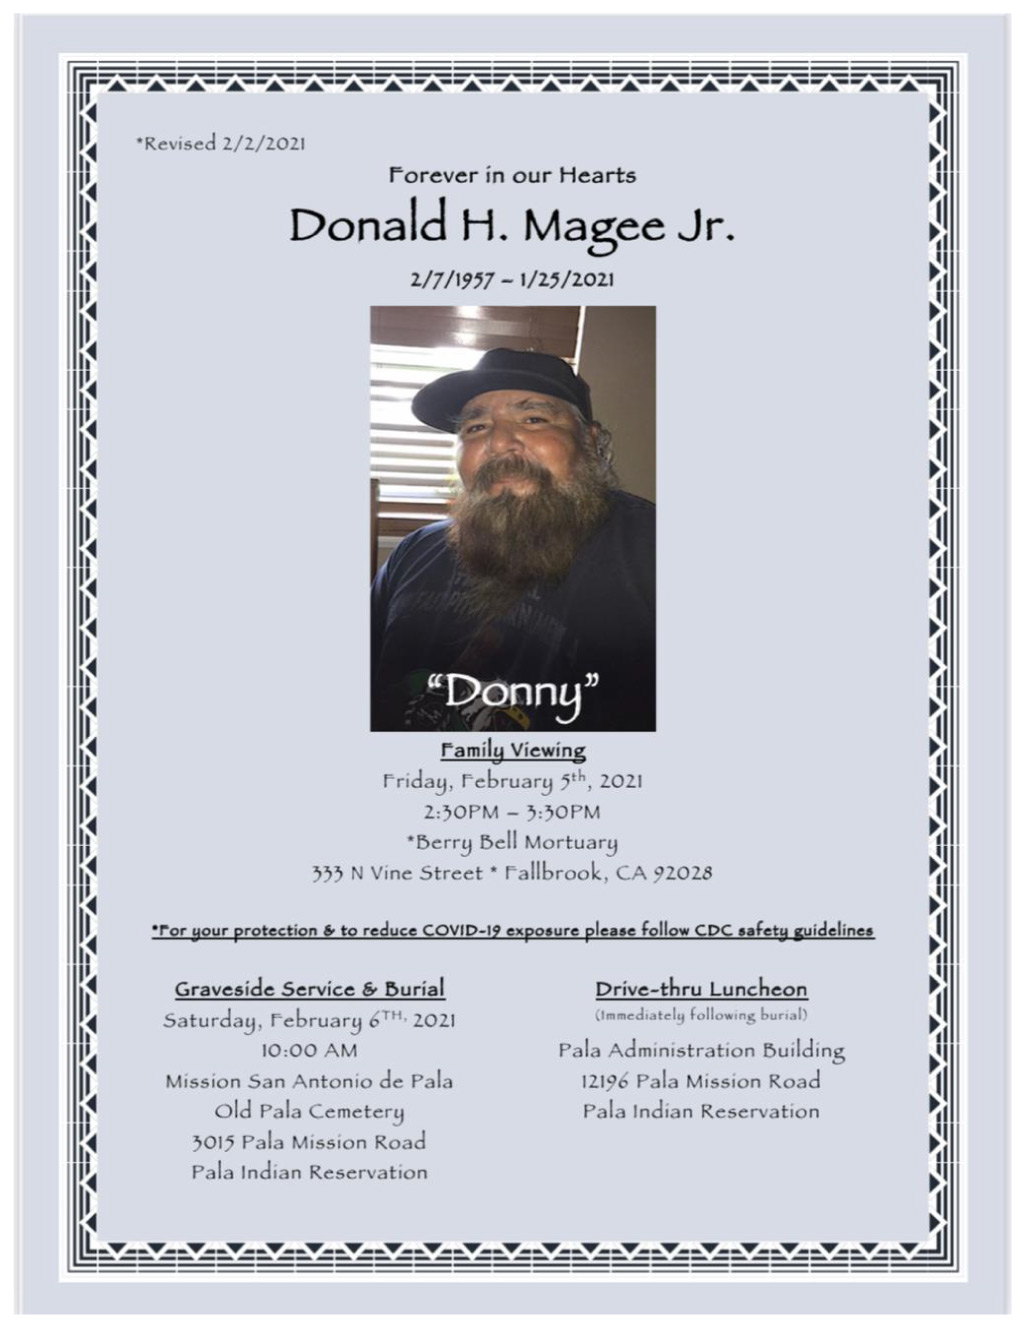 Pala Band of Mission Indians In Memoriam Donald H. Magee Jr.